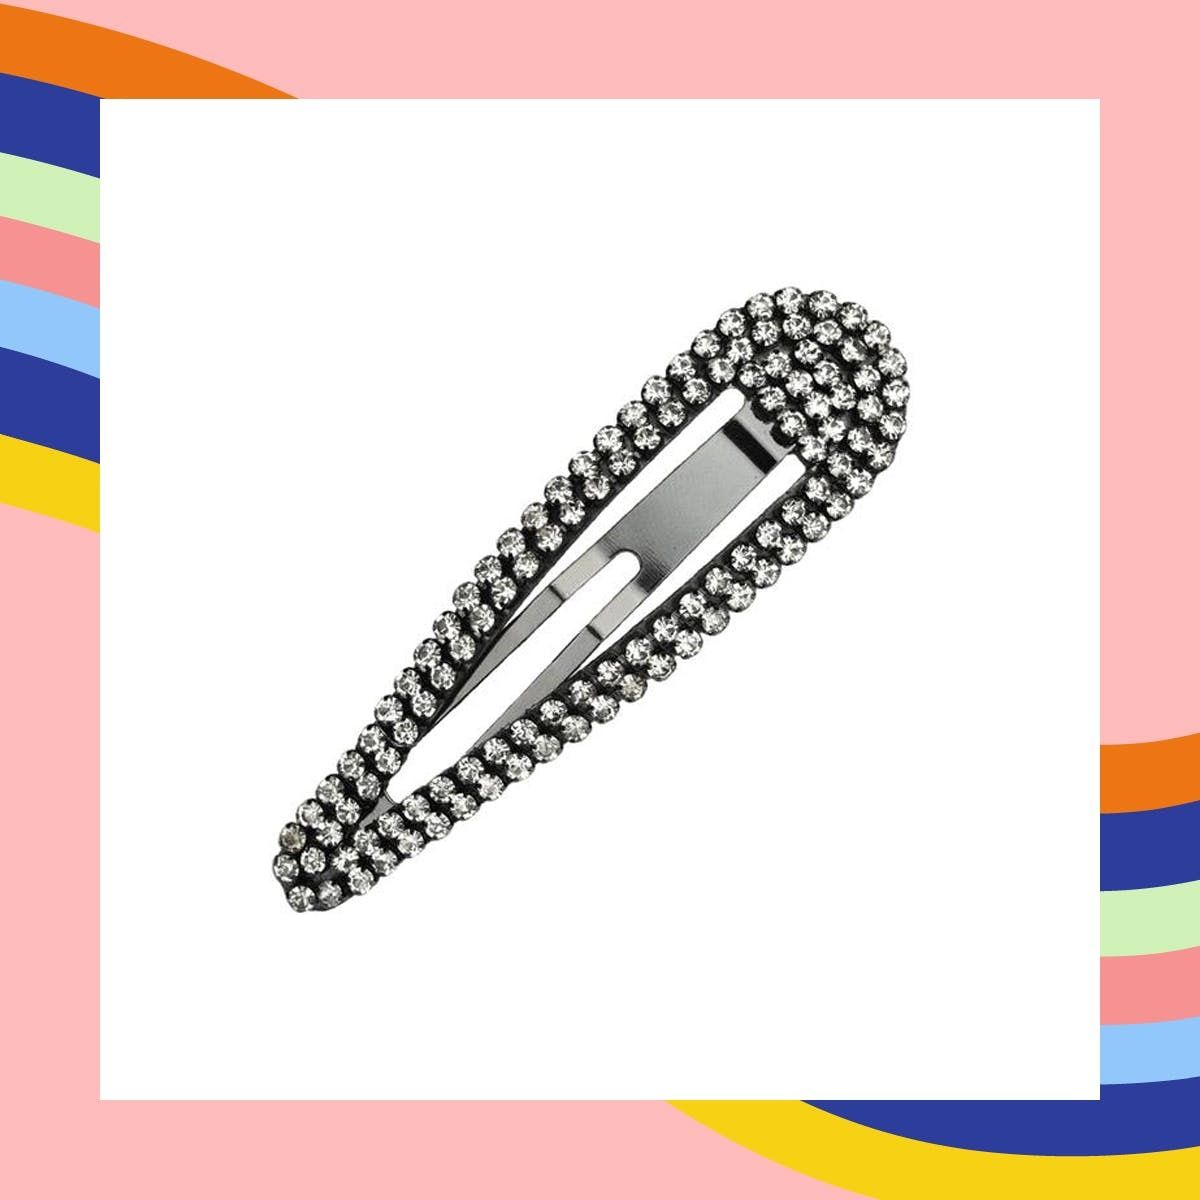 19 Statement Snap Clips That Keep Hair Out of Your Face in the Trendiest Way